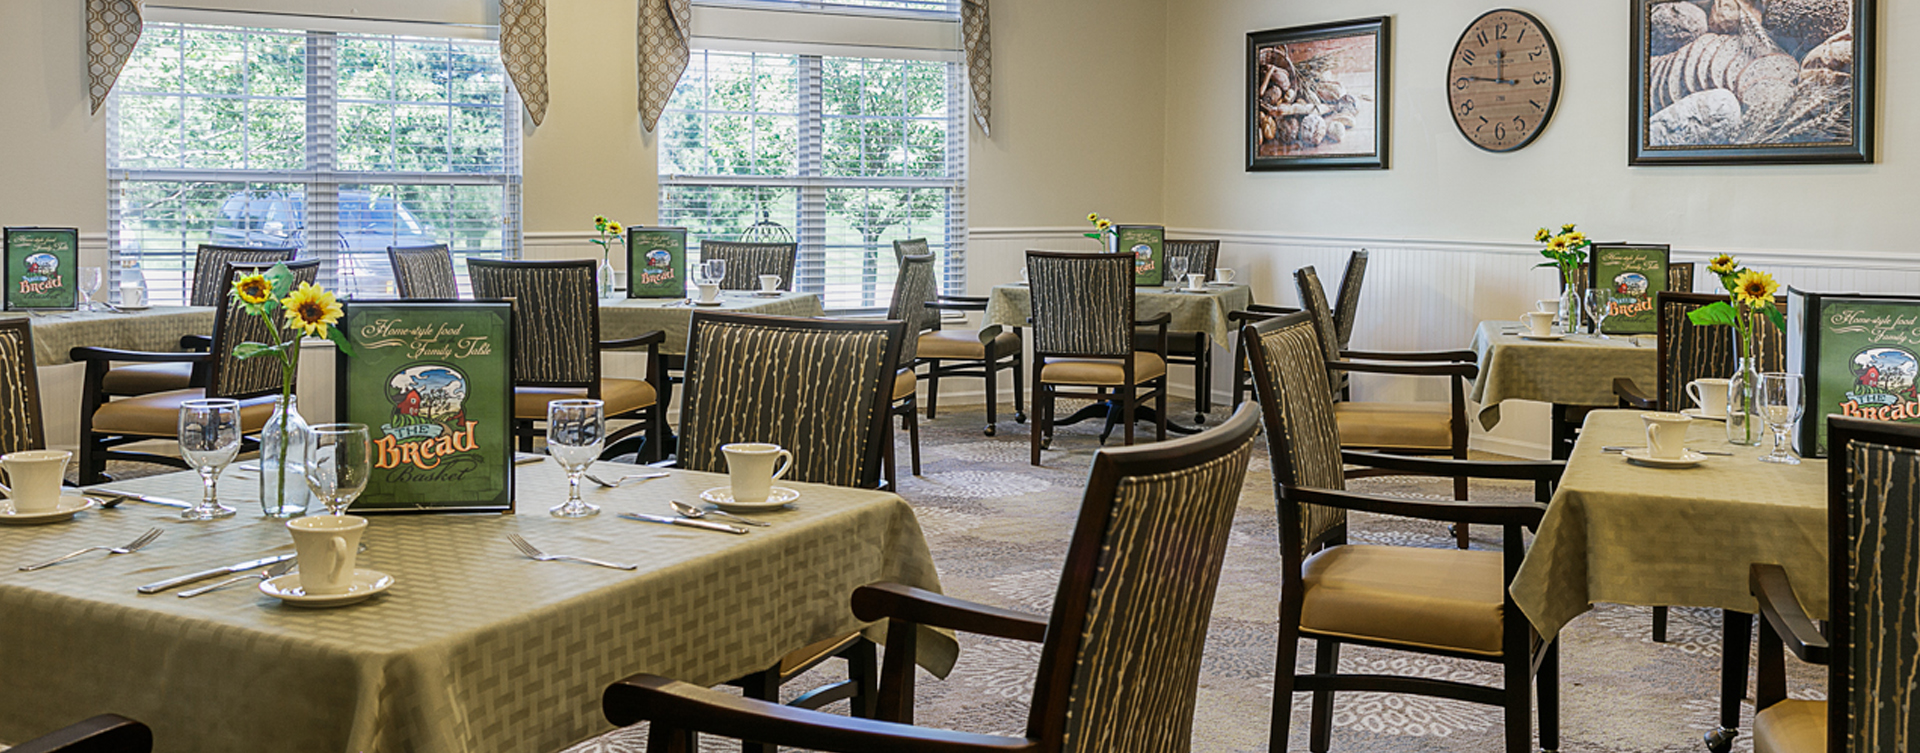 Enjoy restaurant -style meals served three times a day in our dining room at Bickford of Marshalltown